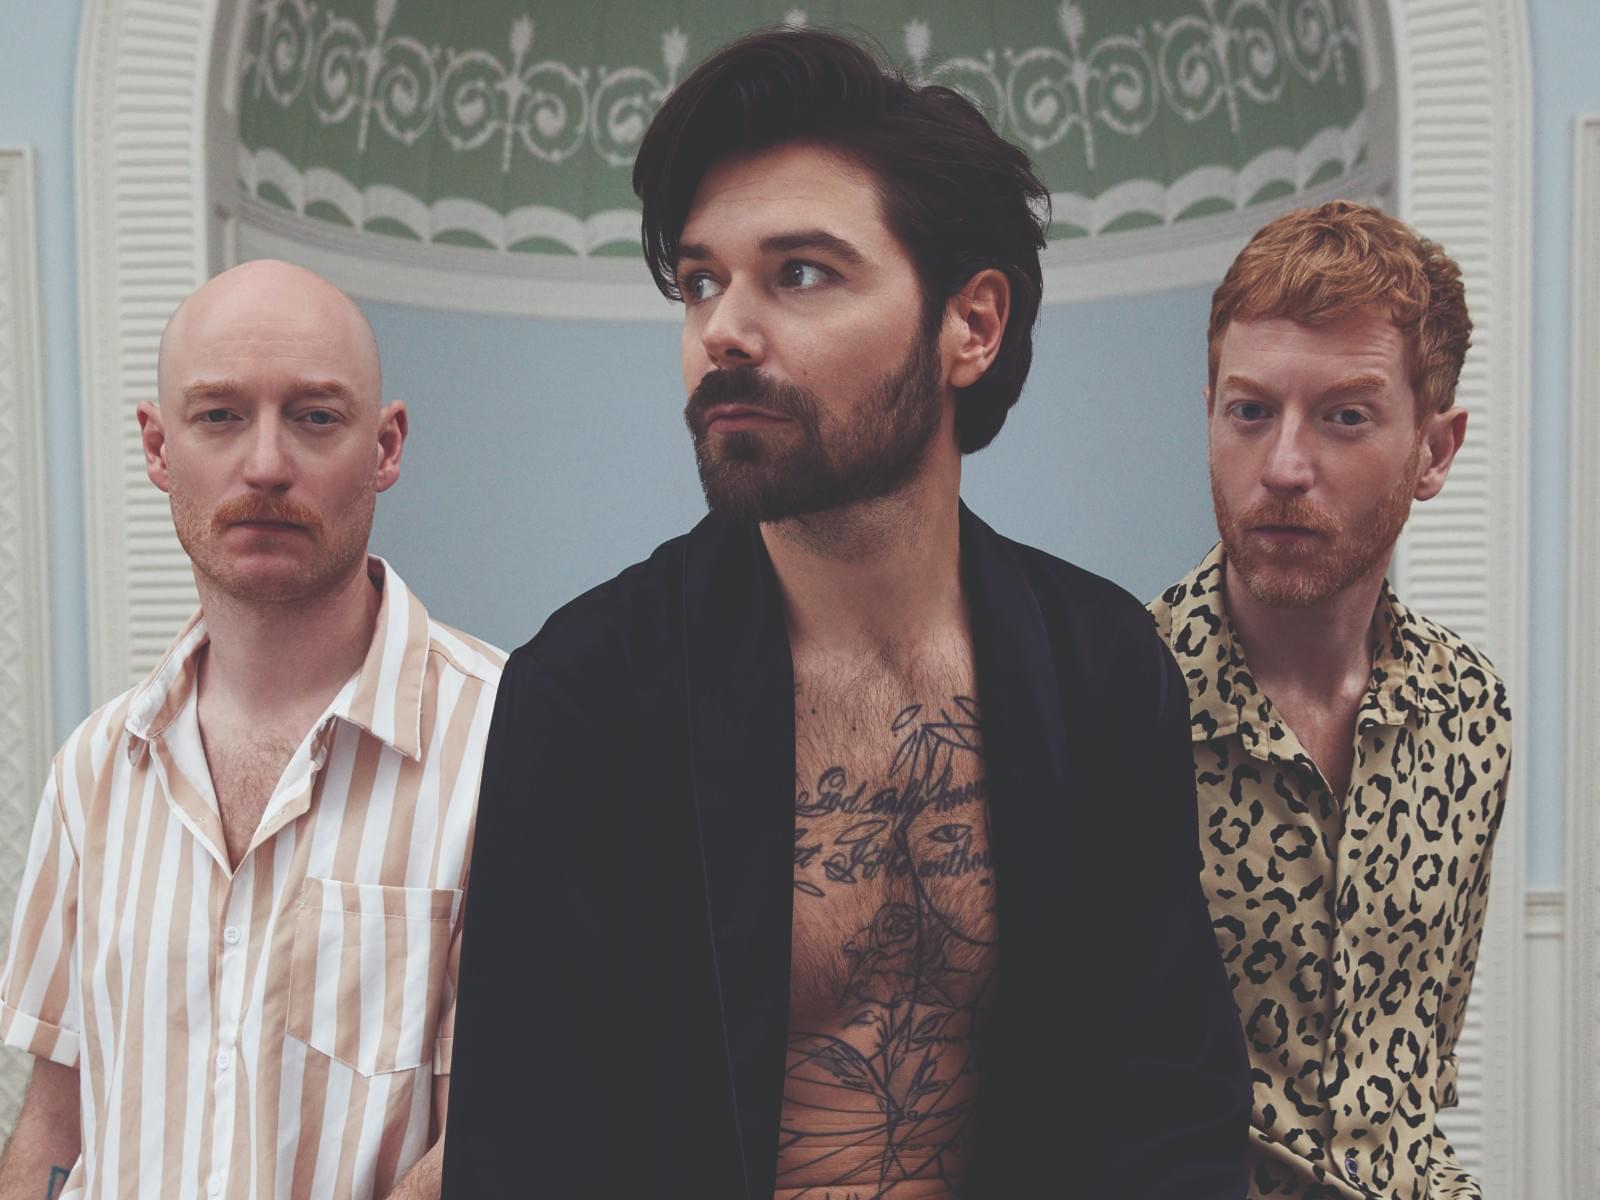 Biffy Clyro Releases Cover of ‘Holier Than Thou’ From ‘The Metallica Blacklist’ [VIDEO]